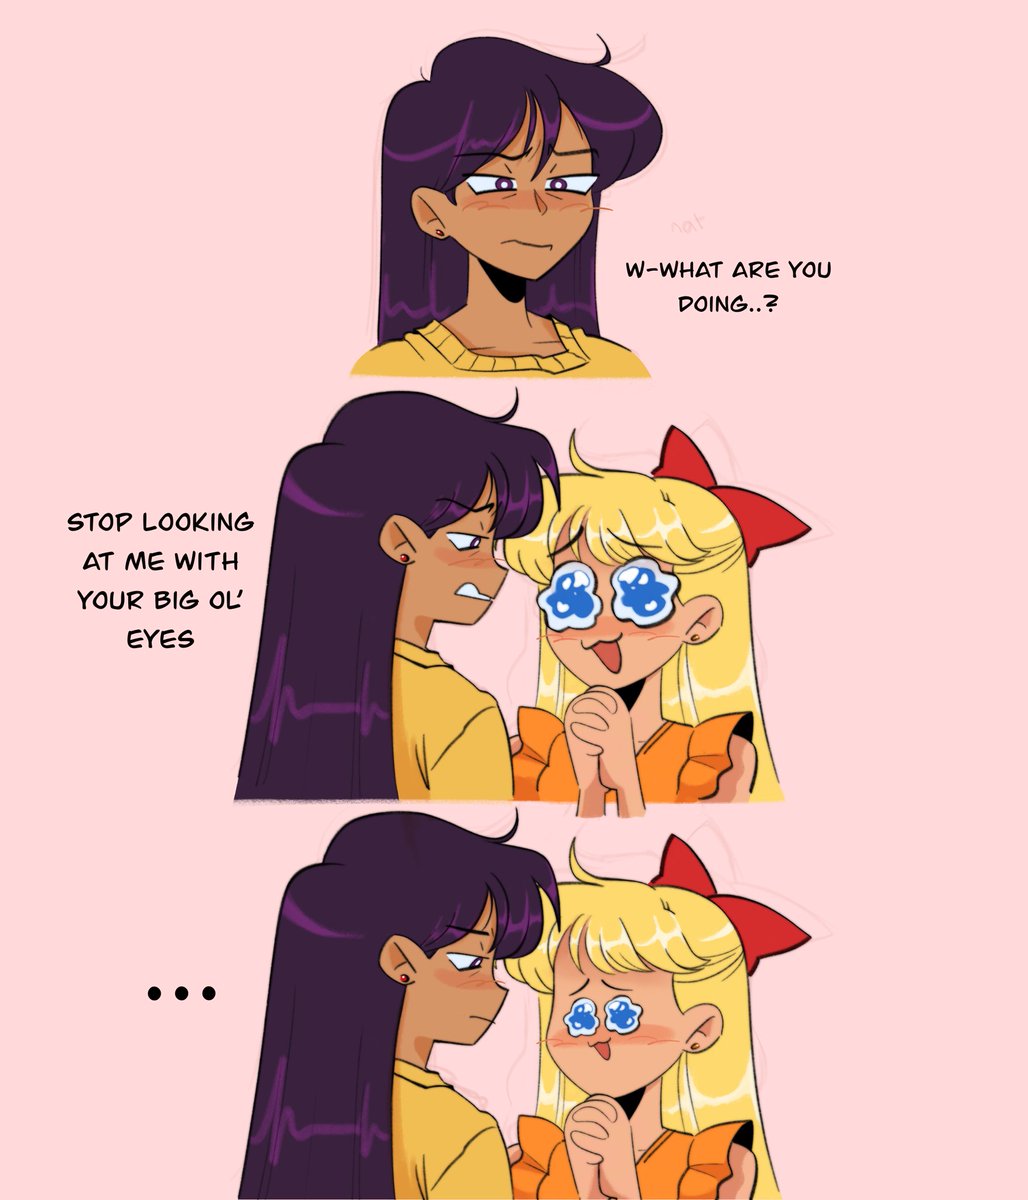 RT @beangusu: [#sailormoon]

happy valentine’s day to these losers https://t.co/G4IhZ90Mzt